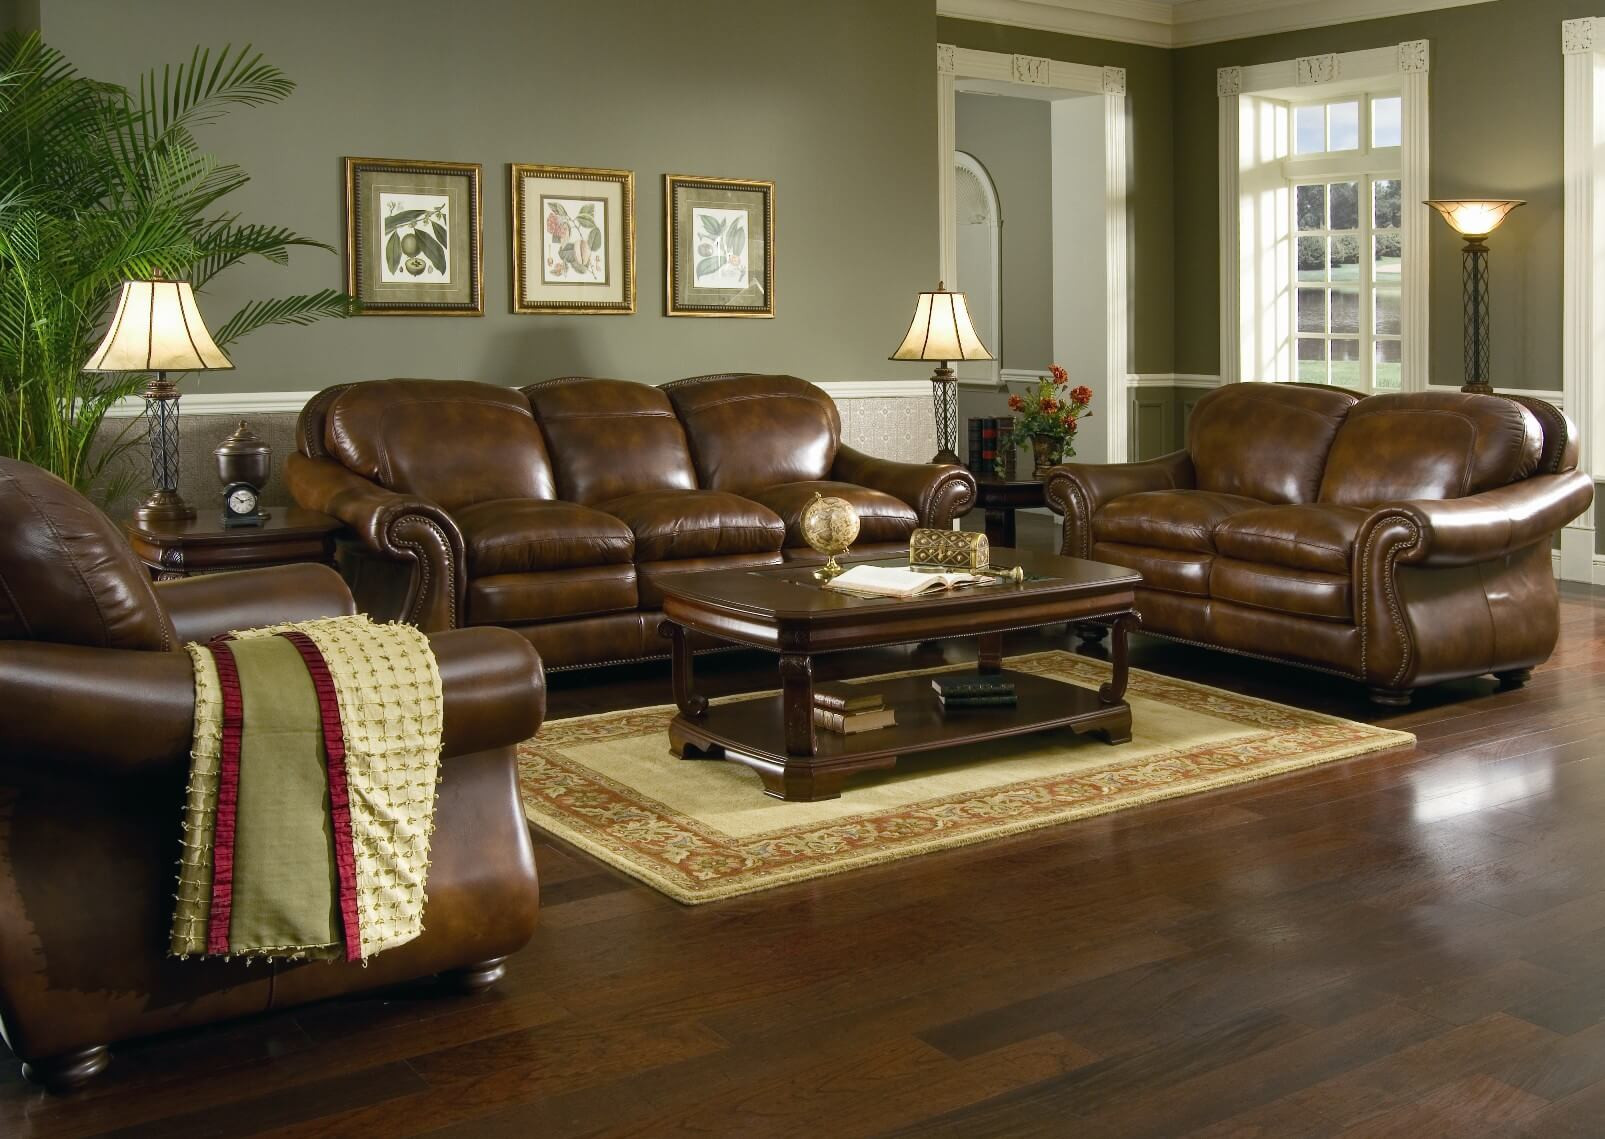 Living Rooms Ideas Brown Sofa
 Living Room Ideas with Brown Sofas TheyDesign